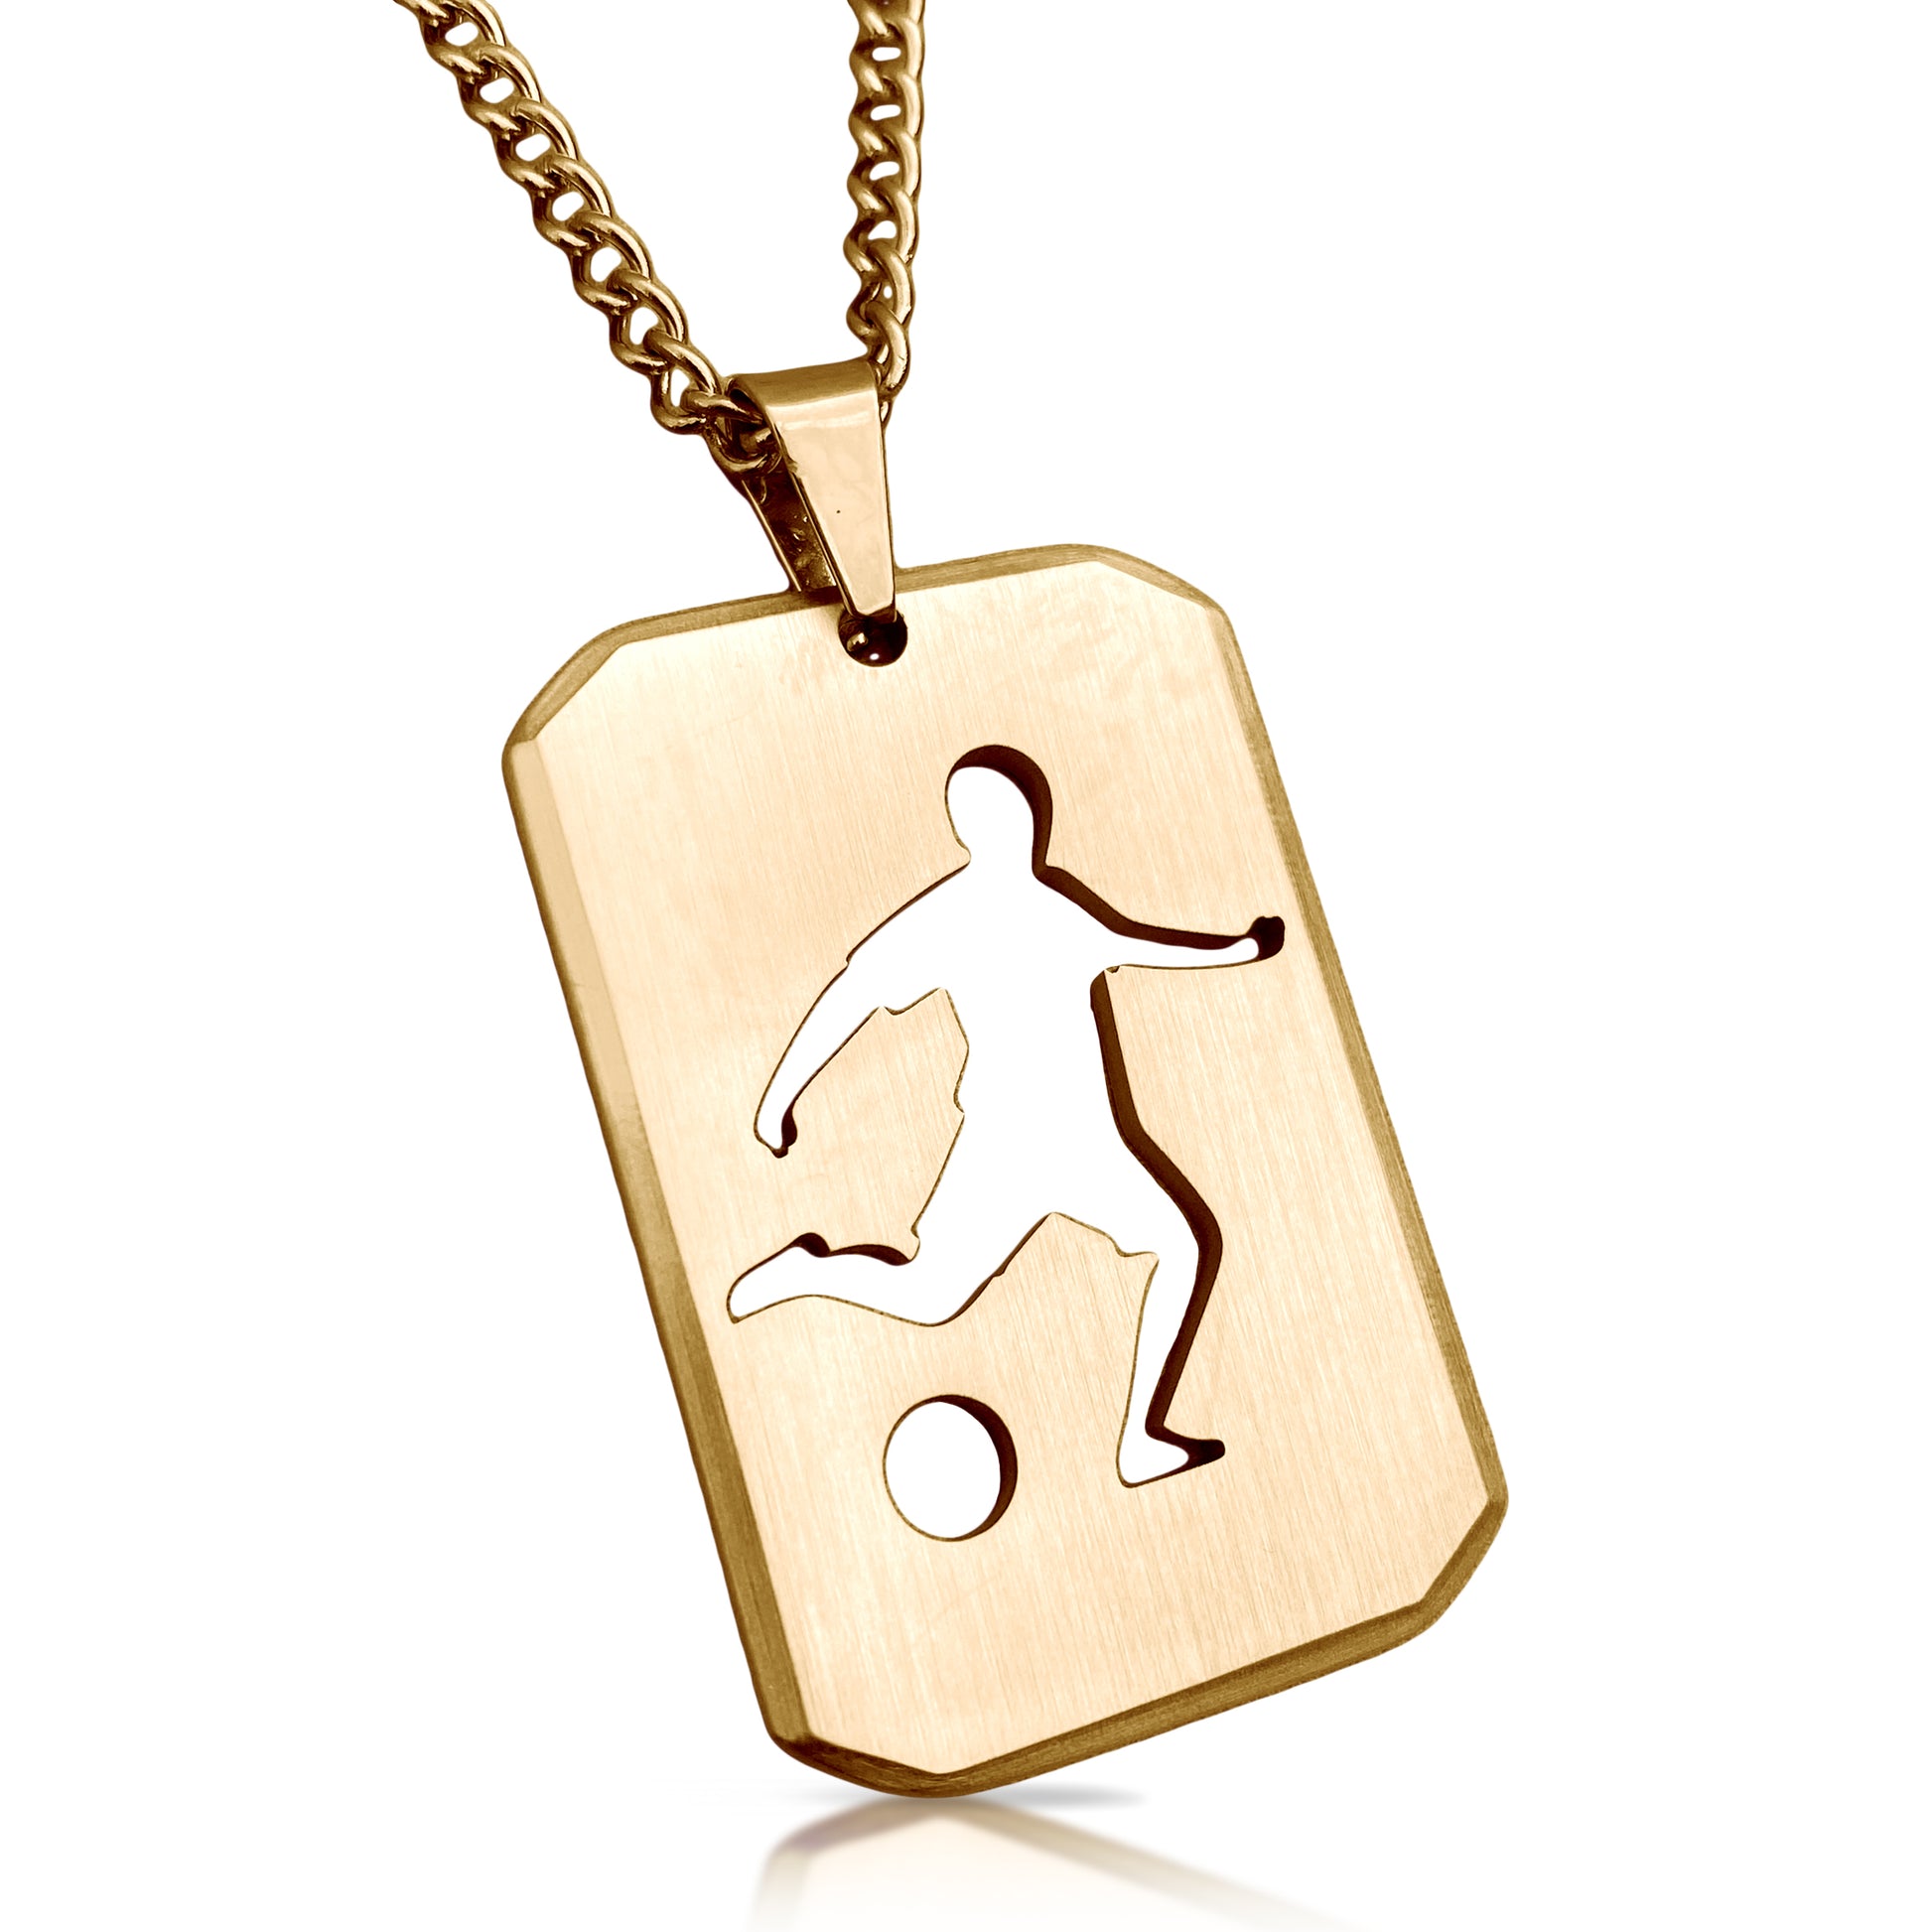 Soccer Cut Out Pendant With Chain Necklace - 14K Gold Plated Stainless Steel